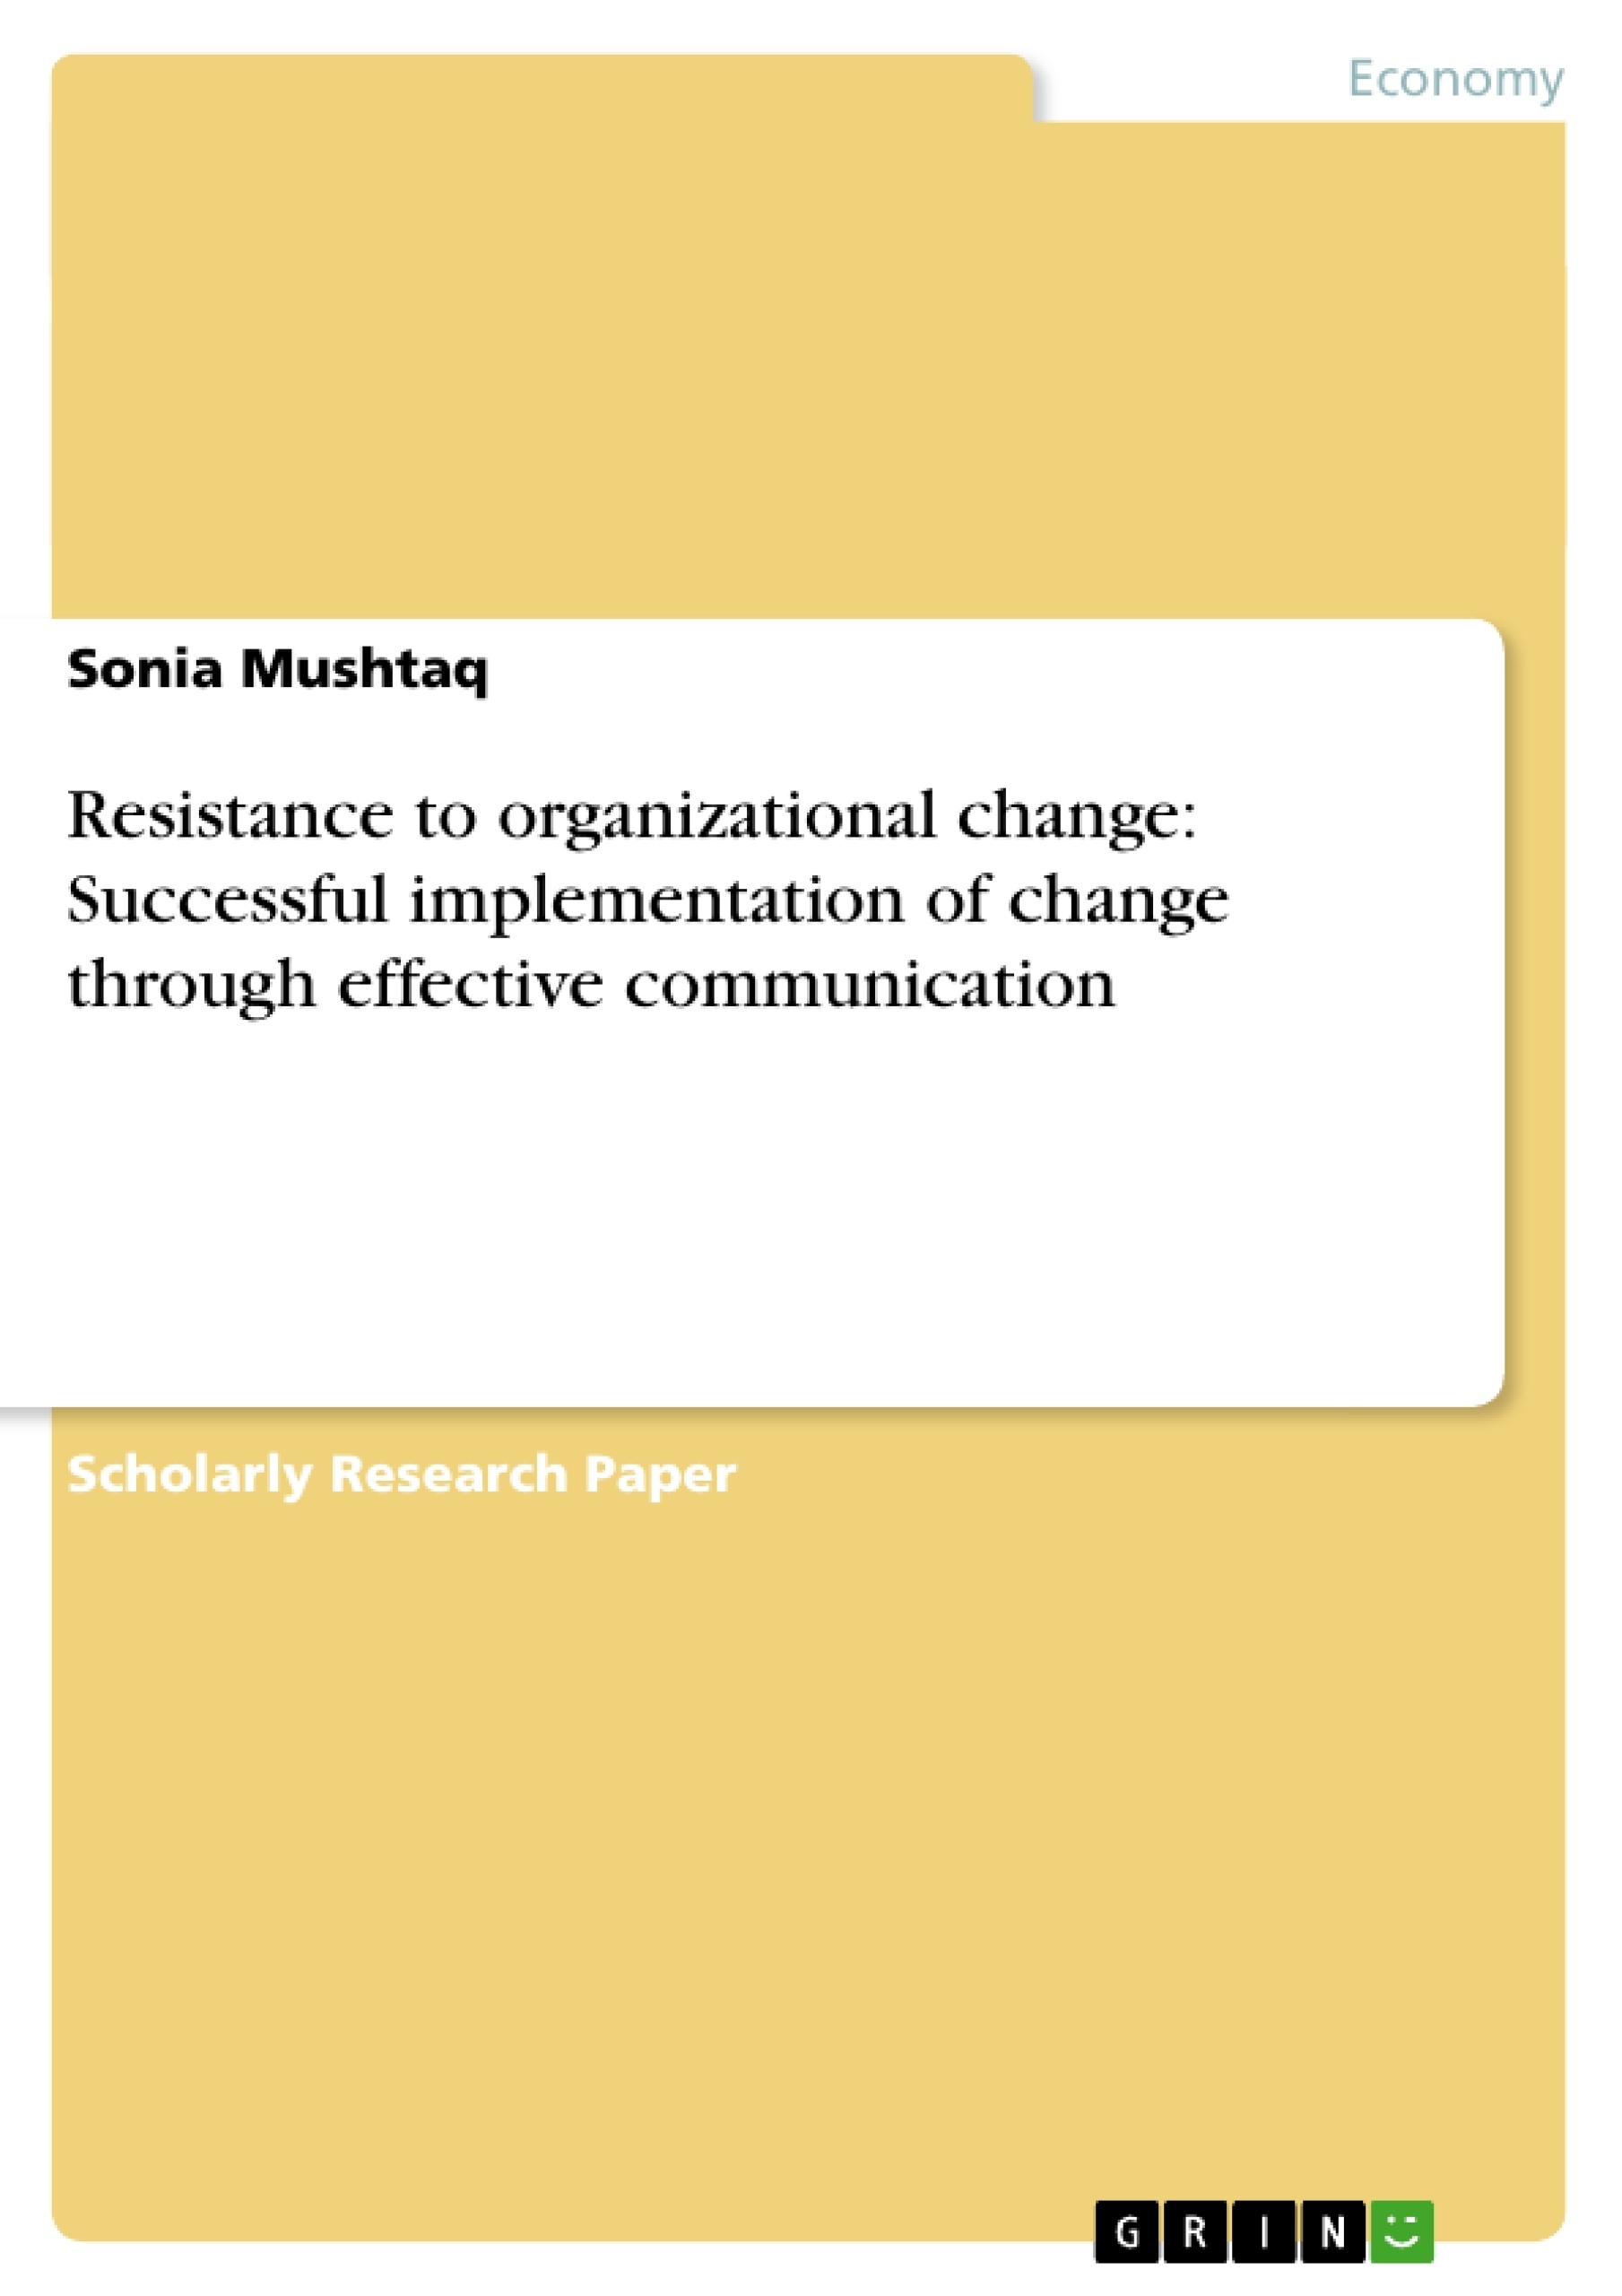 Título: Resistance to organizational change: Successful implementation of change through effective communication